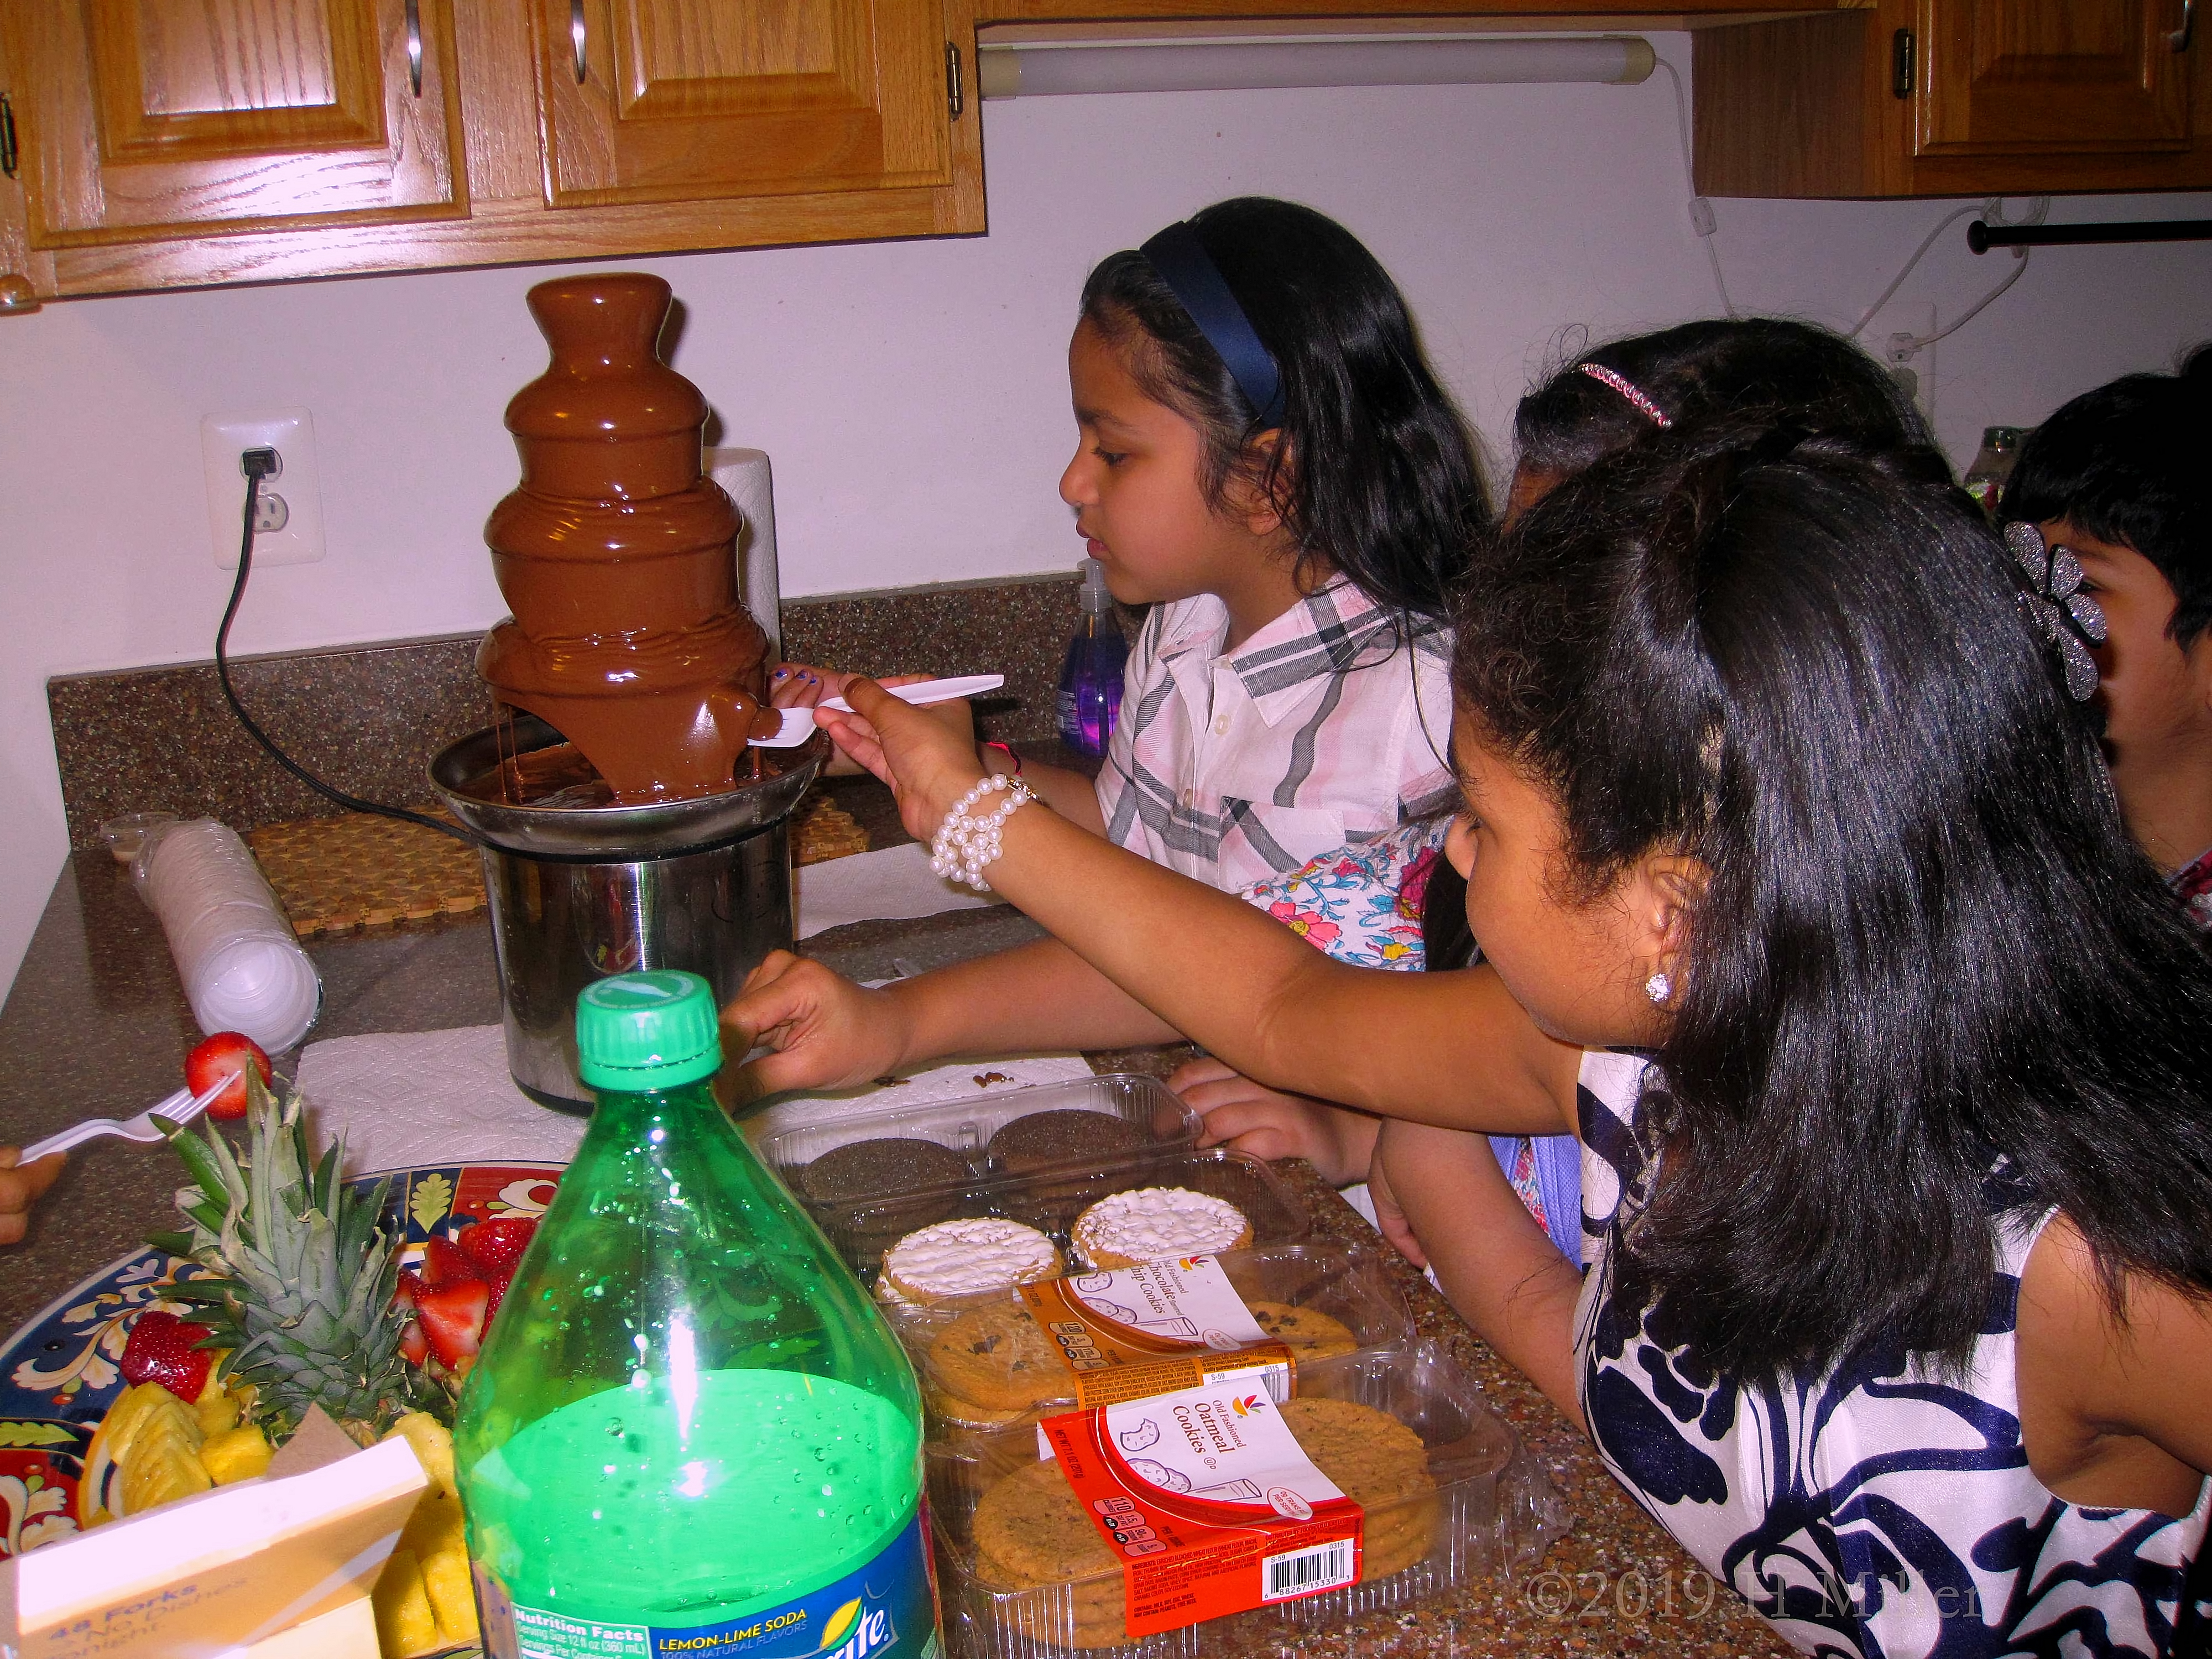 Another Snapshot Of The Yummy Chocolate Fondue Tower! 